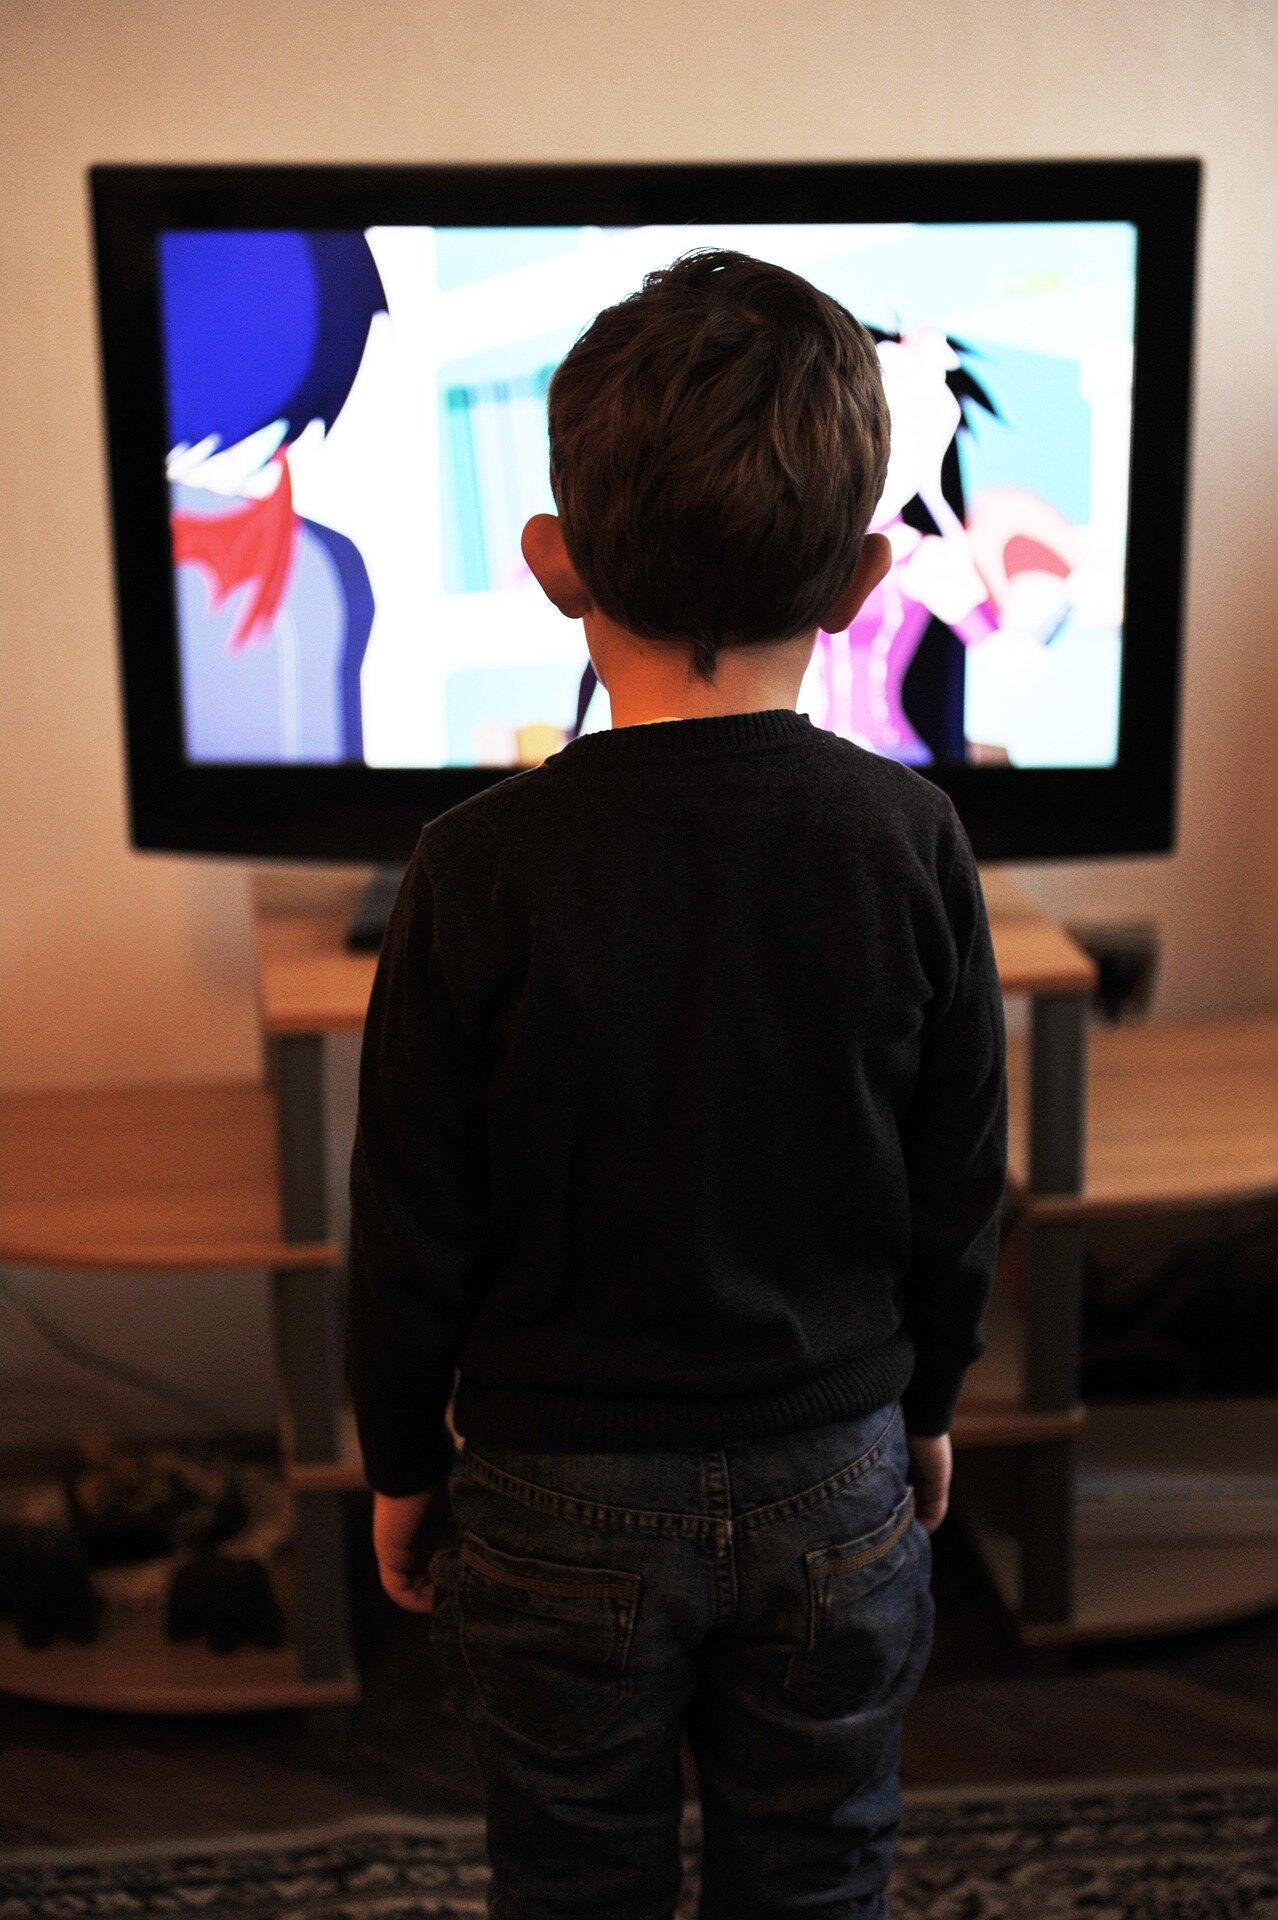 Excessive television viewing in childhood may be a risk factor for later smoking and gambling disorders